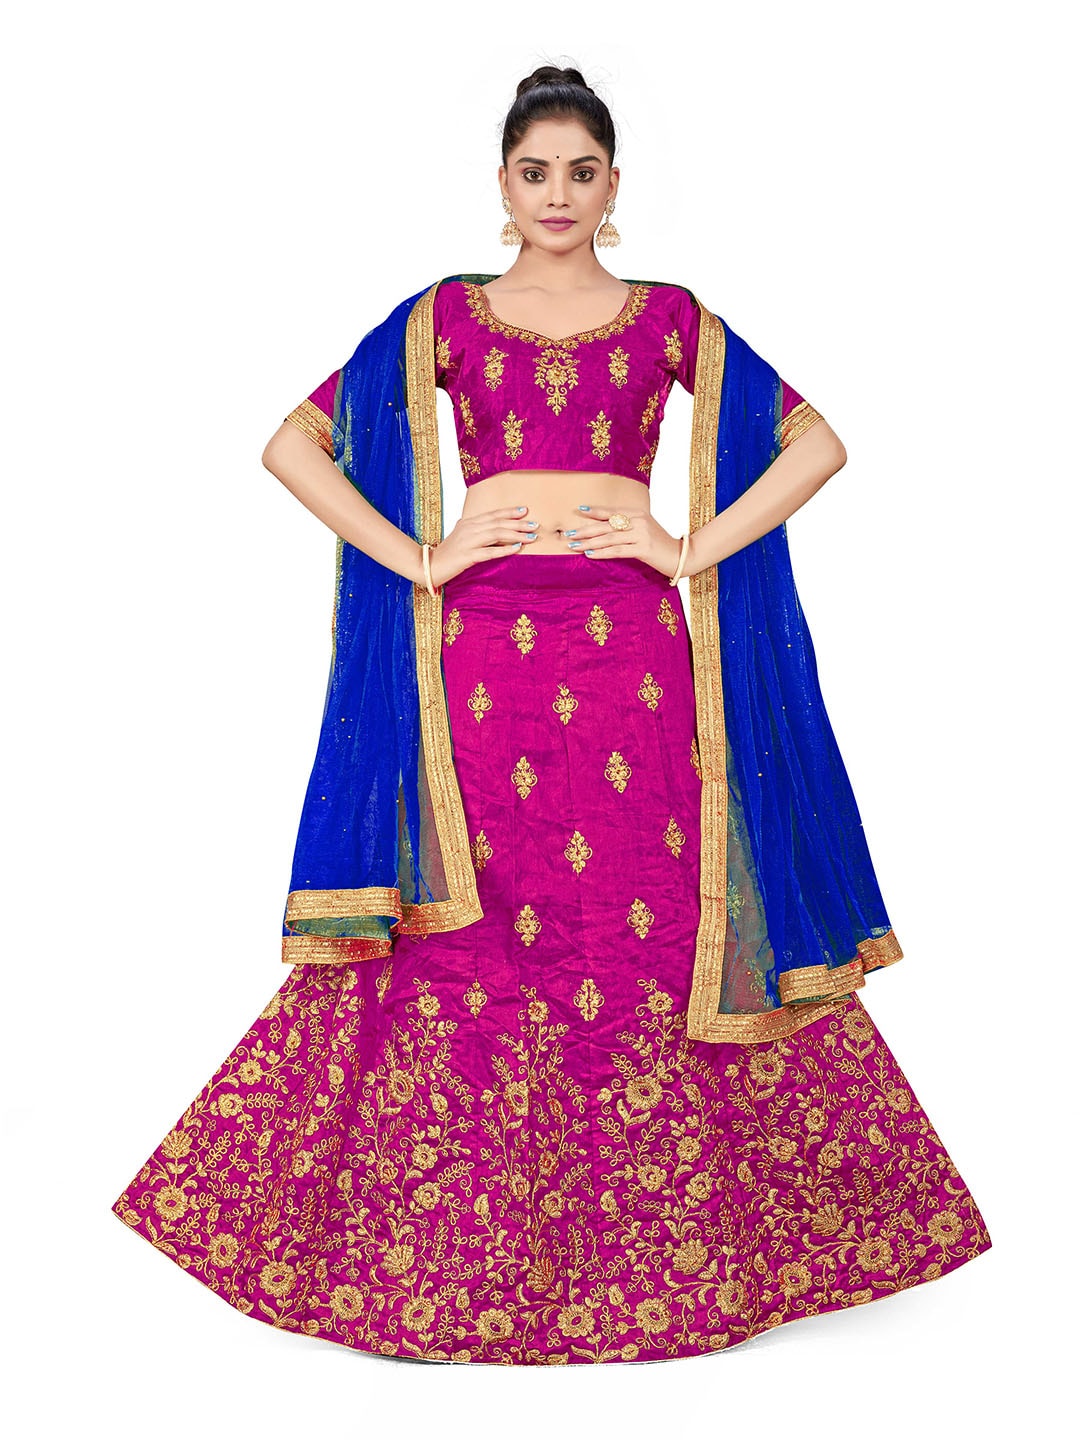 MANVAA Embroidered Beads and Stones Semi-Stitched Lehenga & Unstitched Blouse With Dupatta Price in India